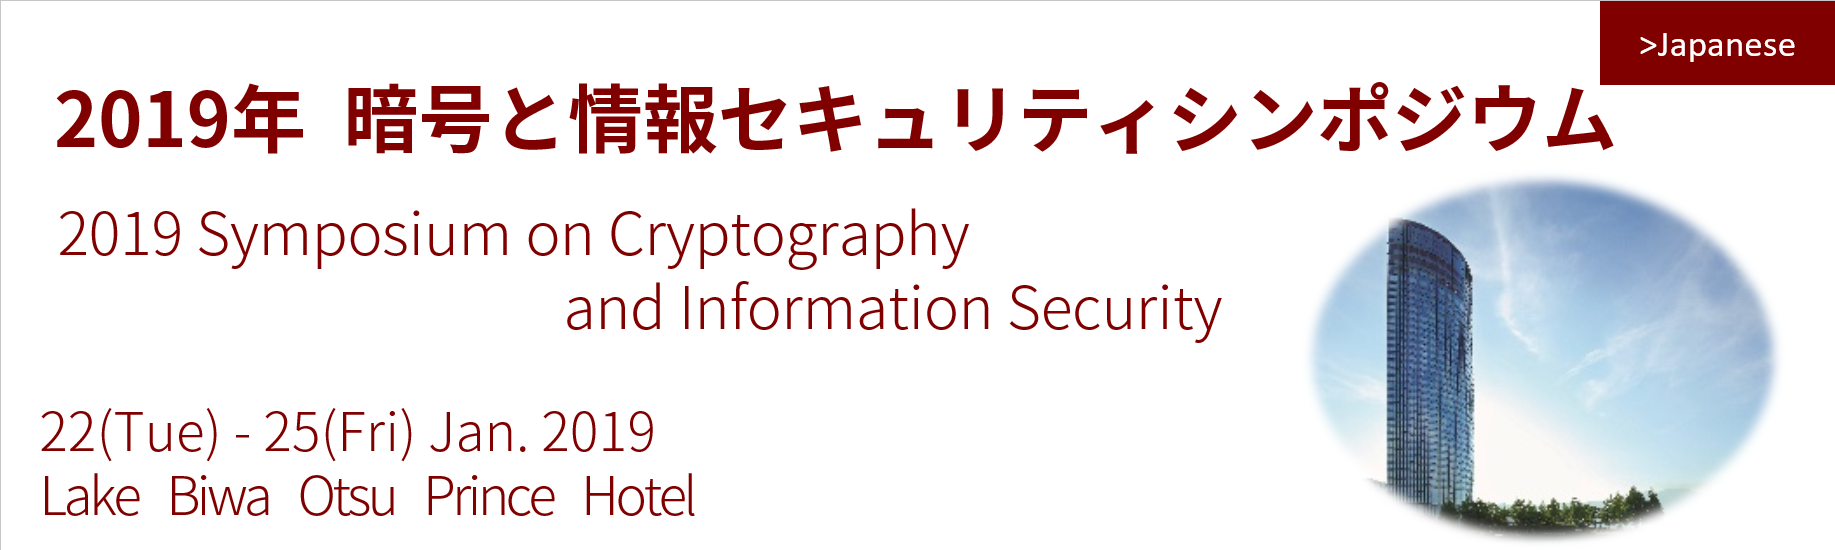 SCIS2019 2019 Symposium on Cryptography and Information Security